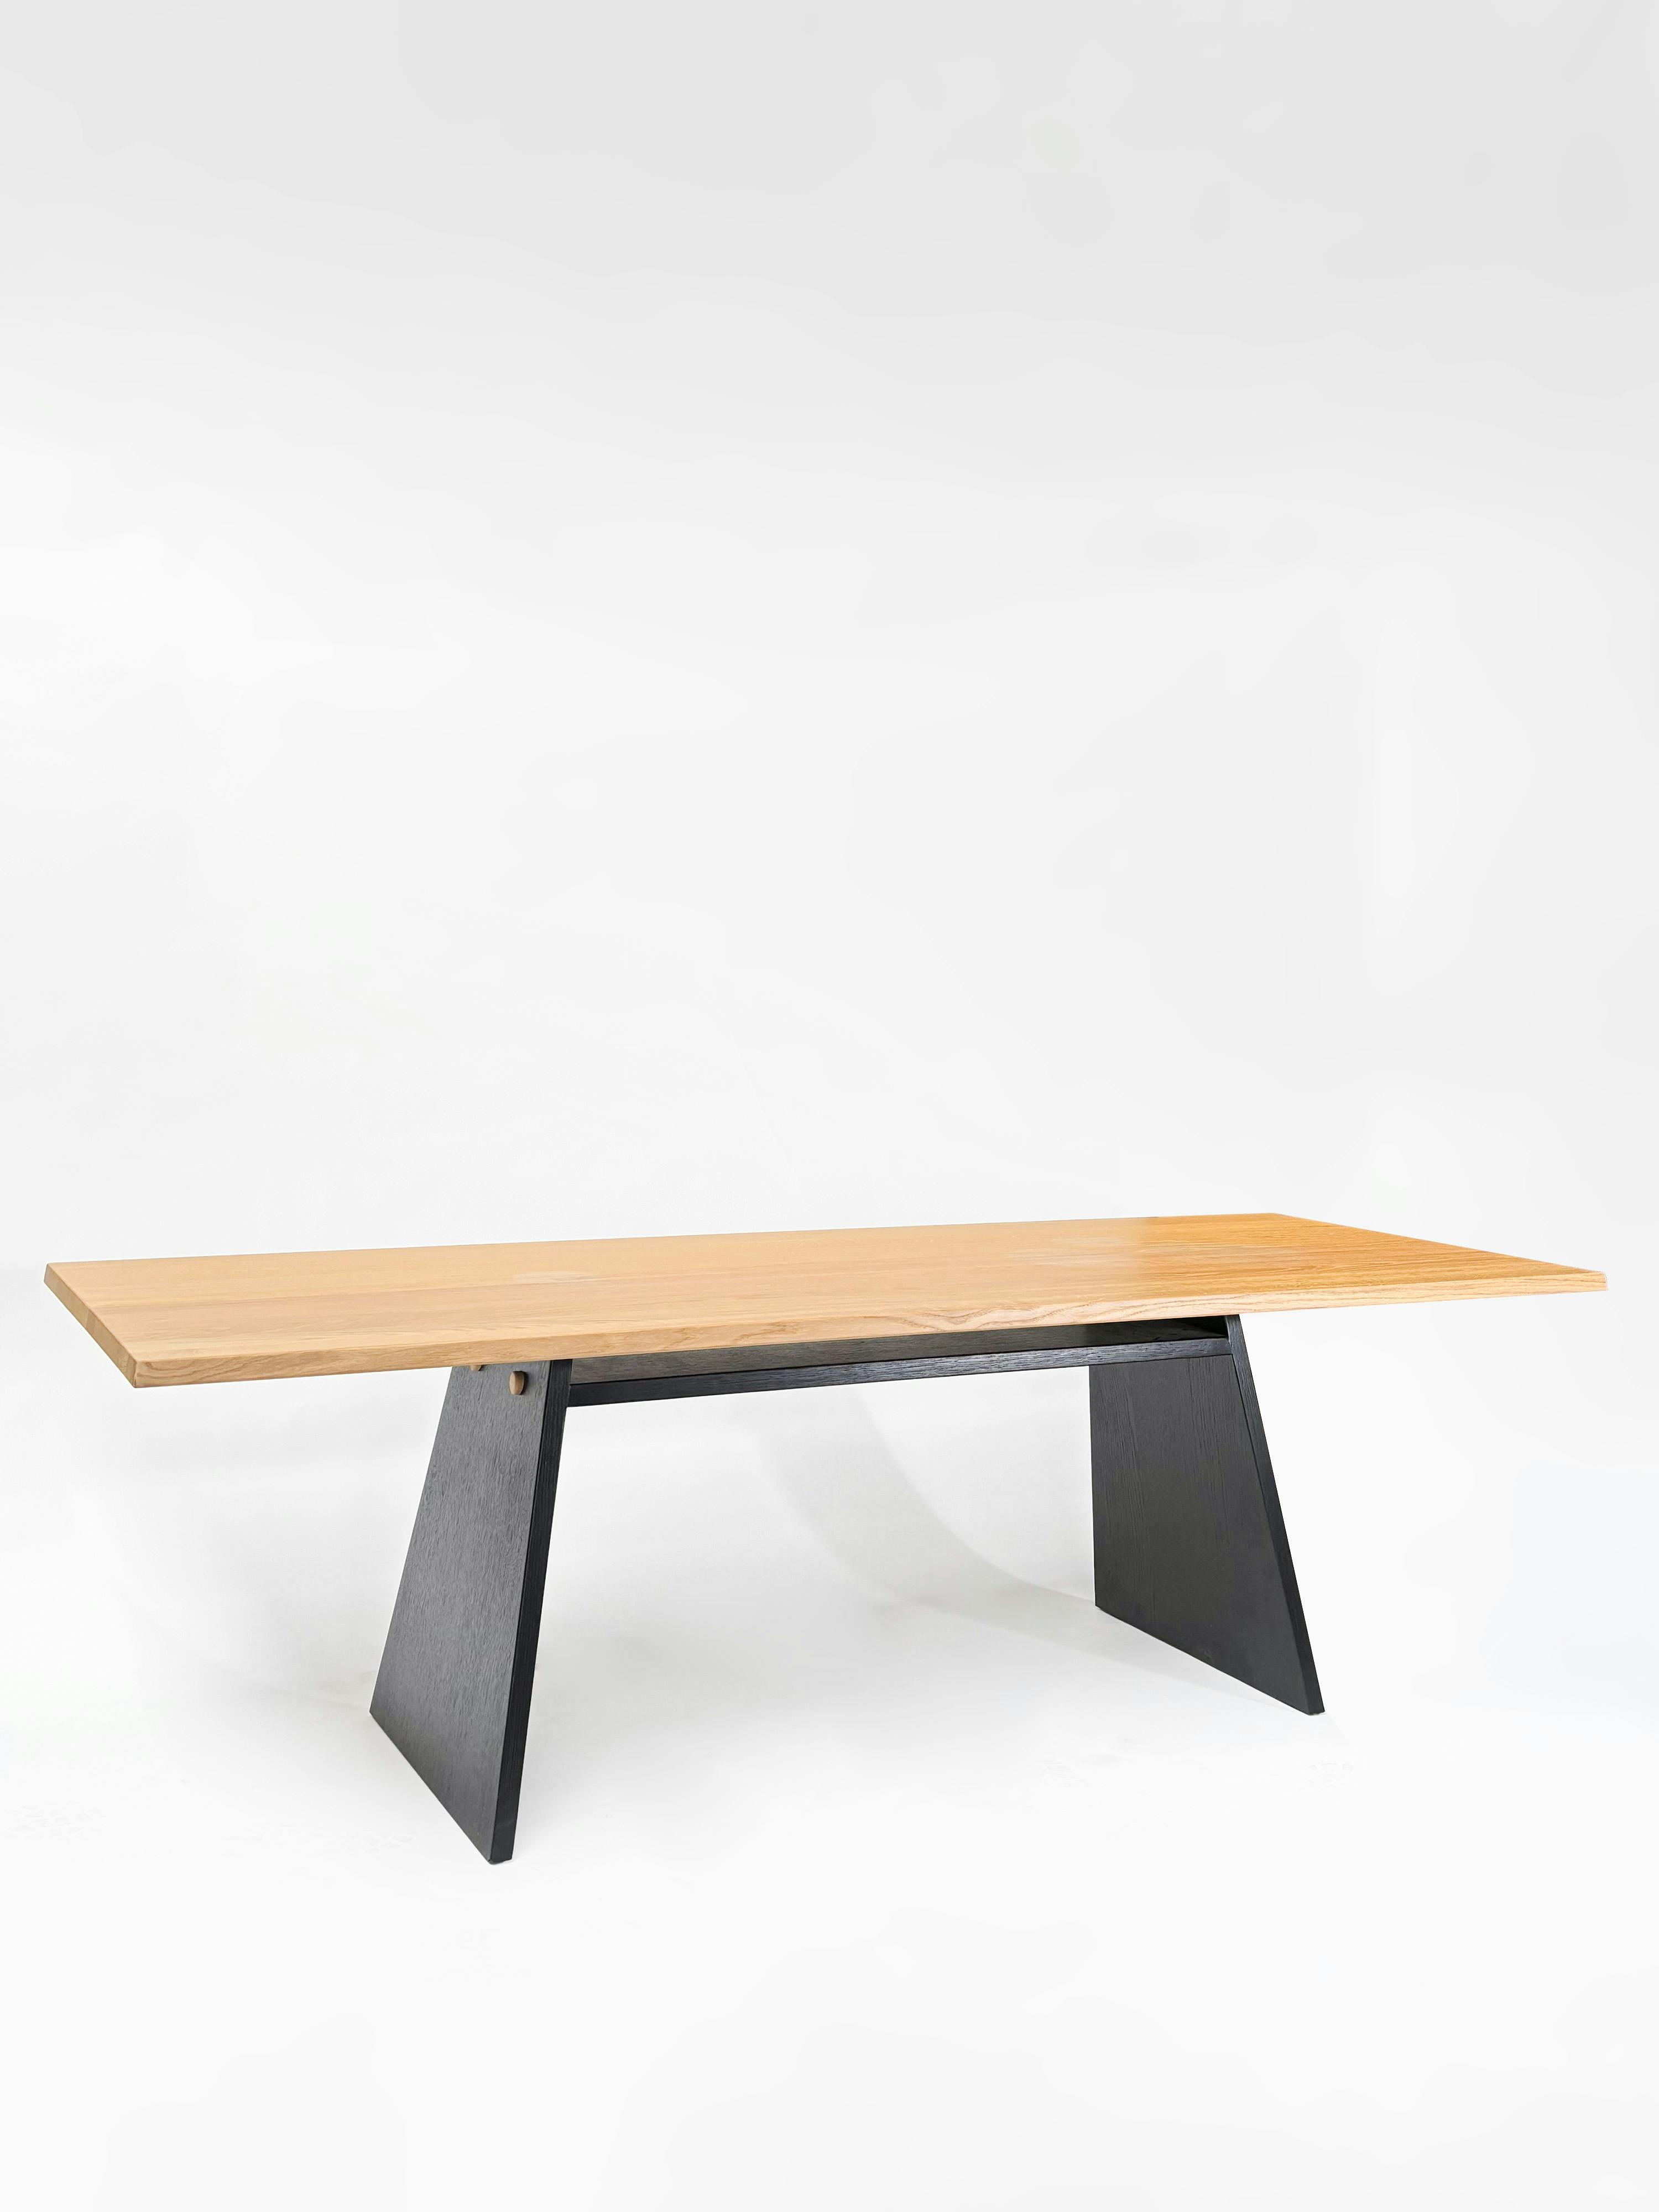 CRUSO Natural Oak Dining Table with Black Base - 240cm x 90cm - Relieve Furniture